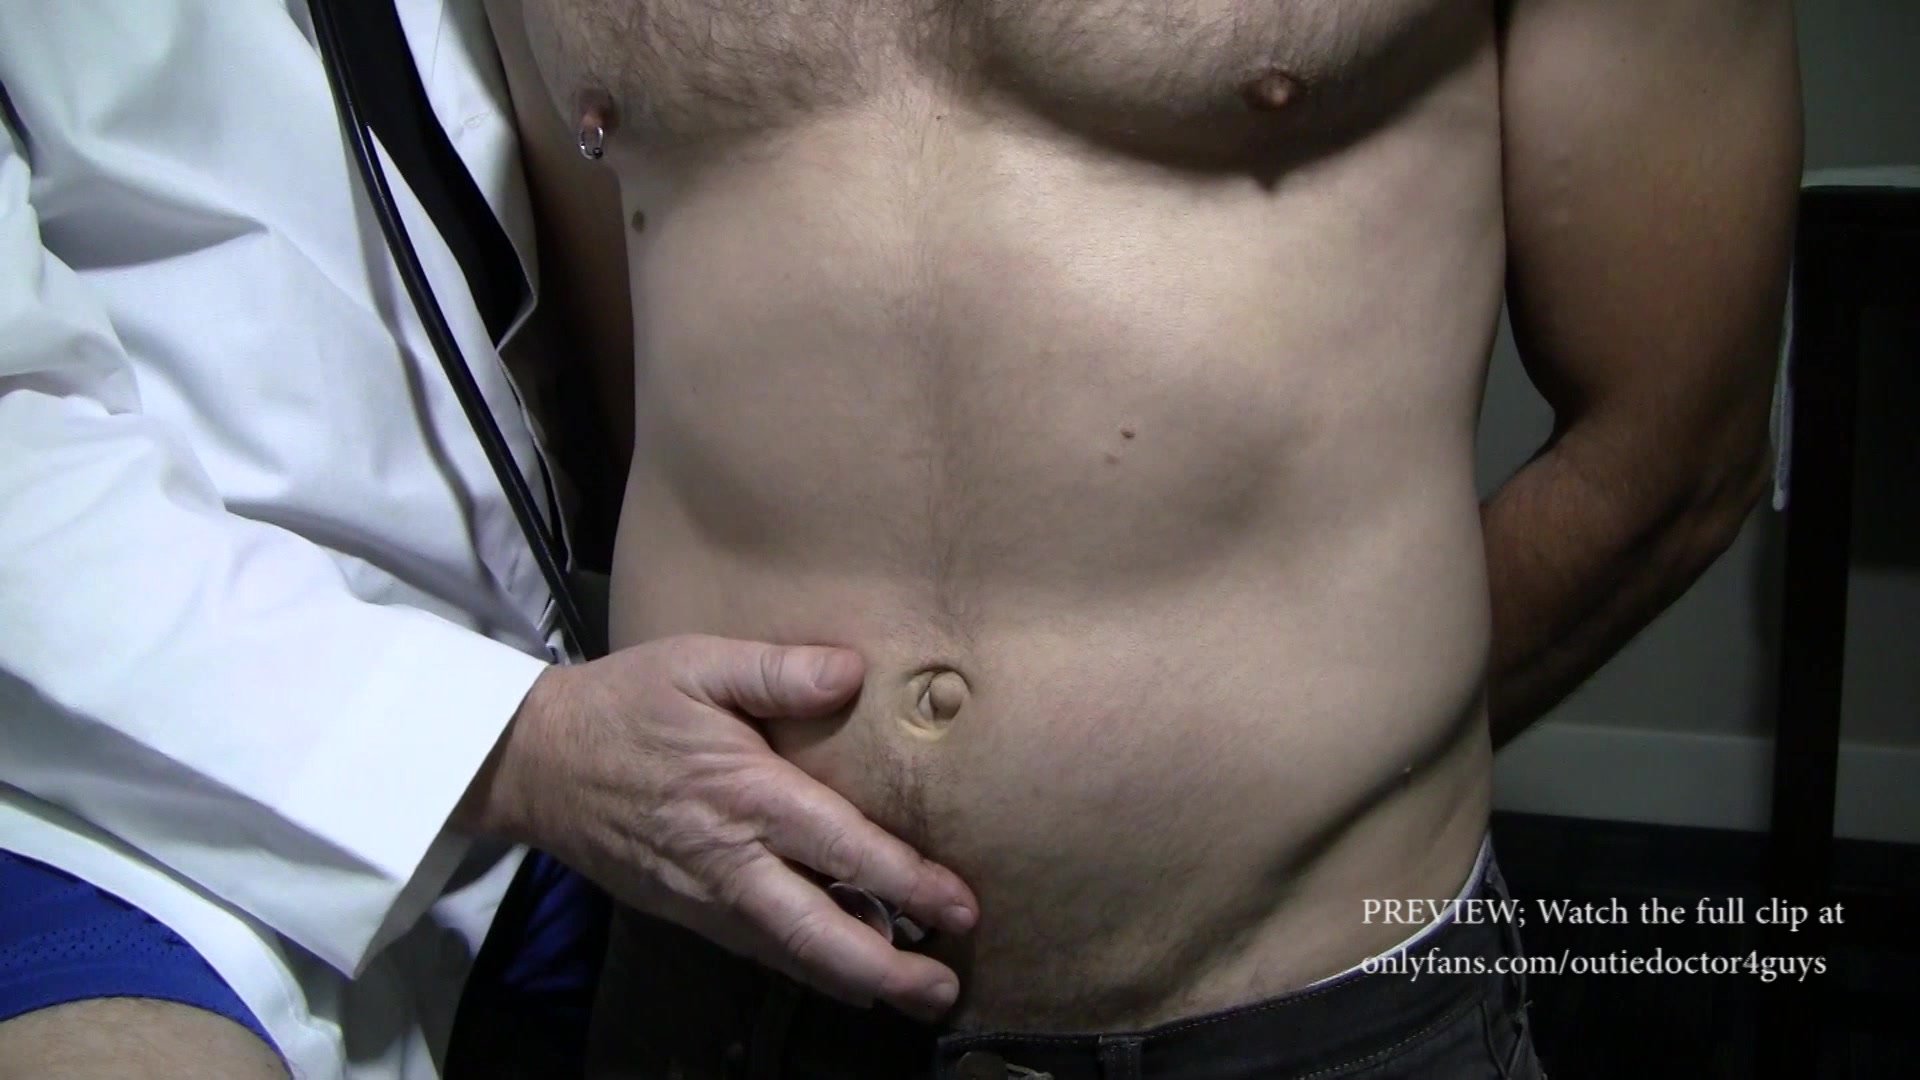 outie bellybutton stud examined